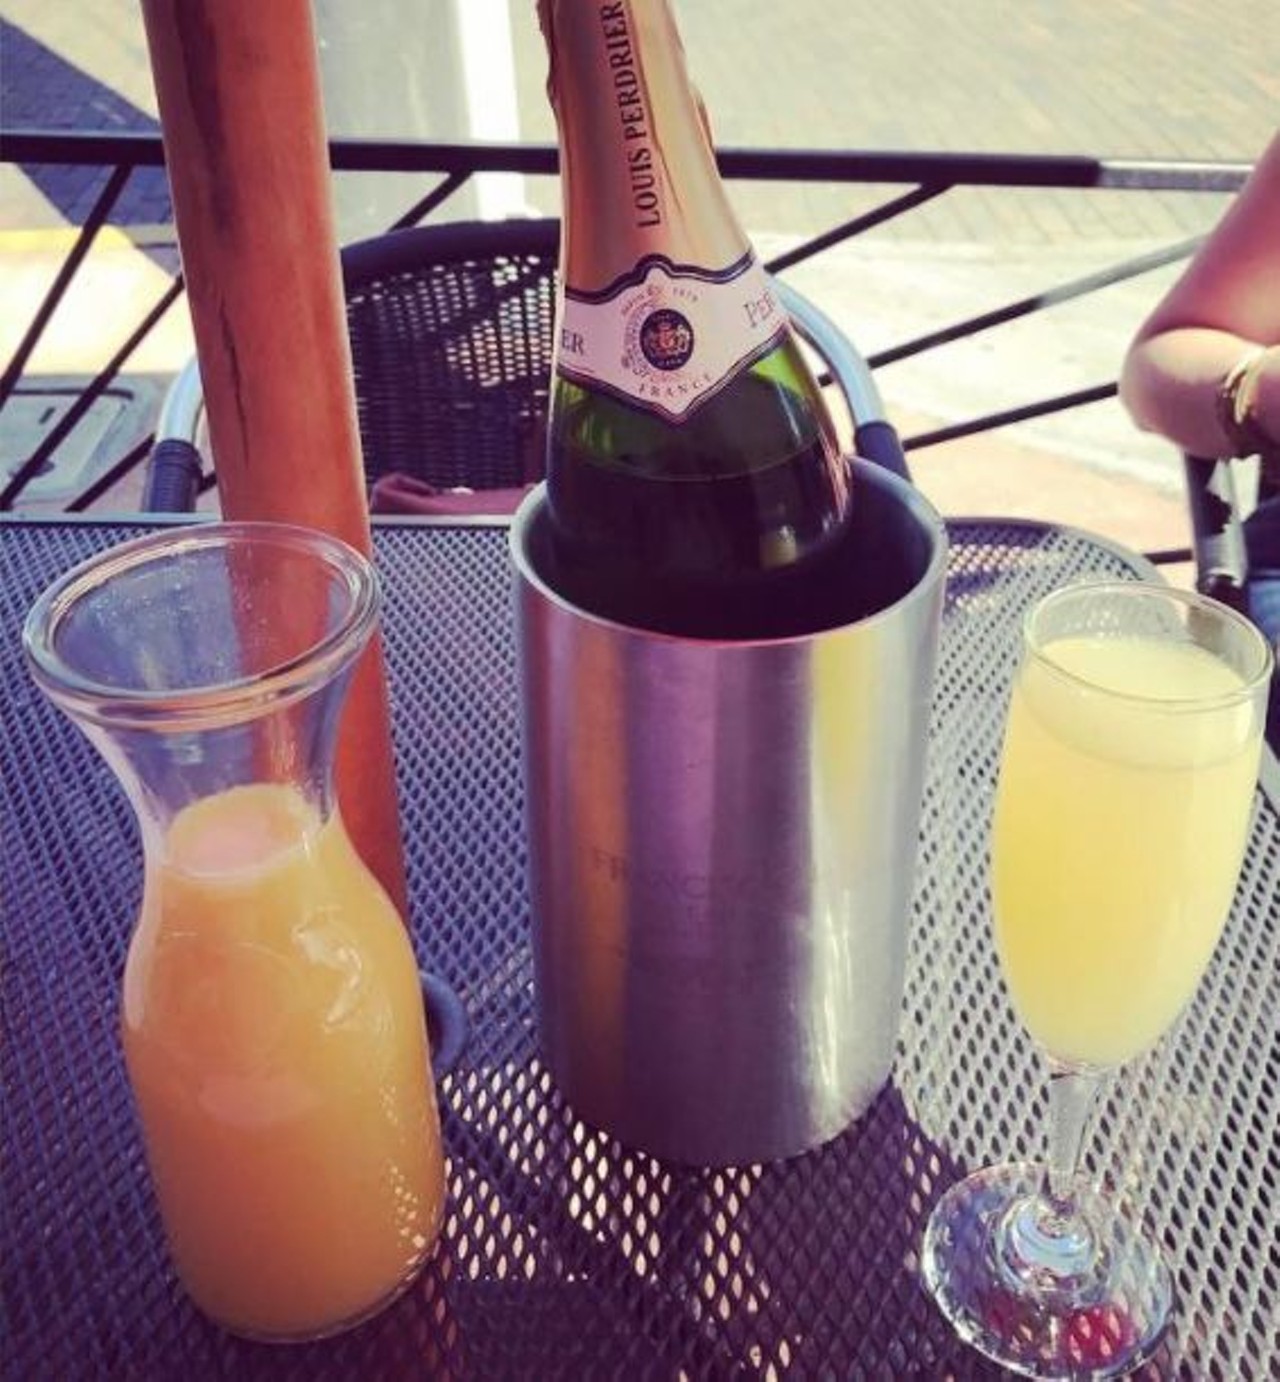 Dexter&#146;s
A brunchtime favorite, the bottomless mimosas at any one of the four locations are $12 and come in six flavors: mango, raspberry, peach, orange, cranberry and pineapple.
Multiple locations
Photo via kelly_ann_84/Instagram